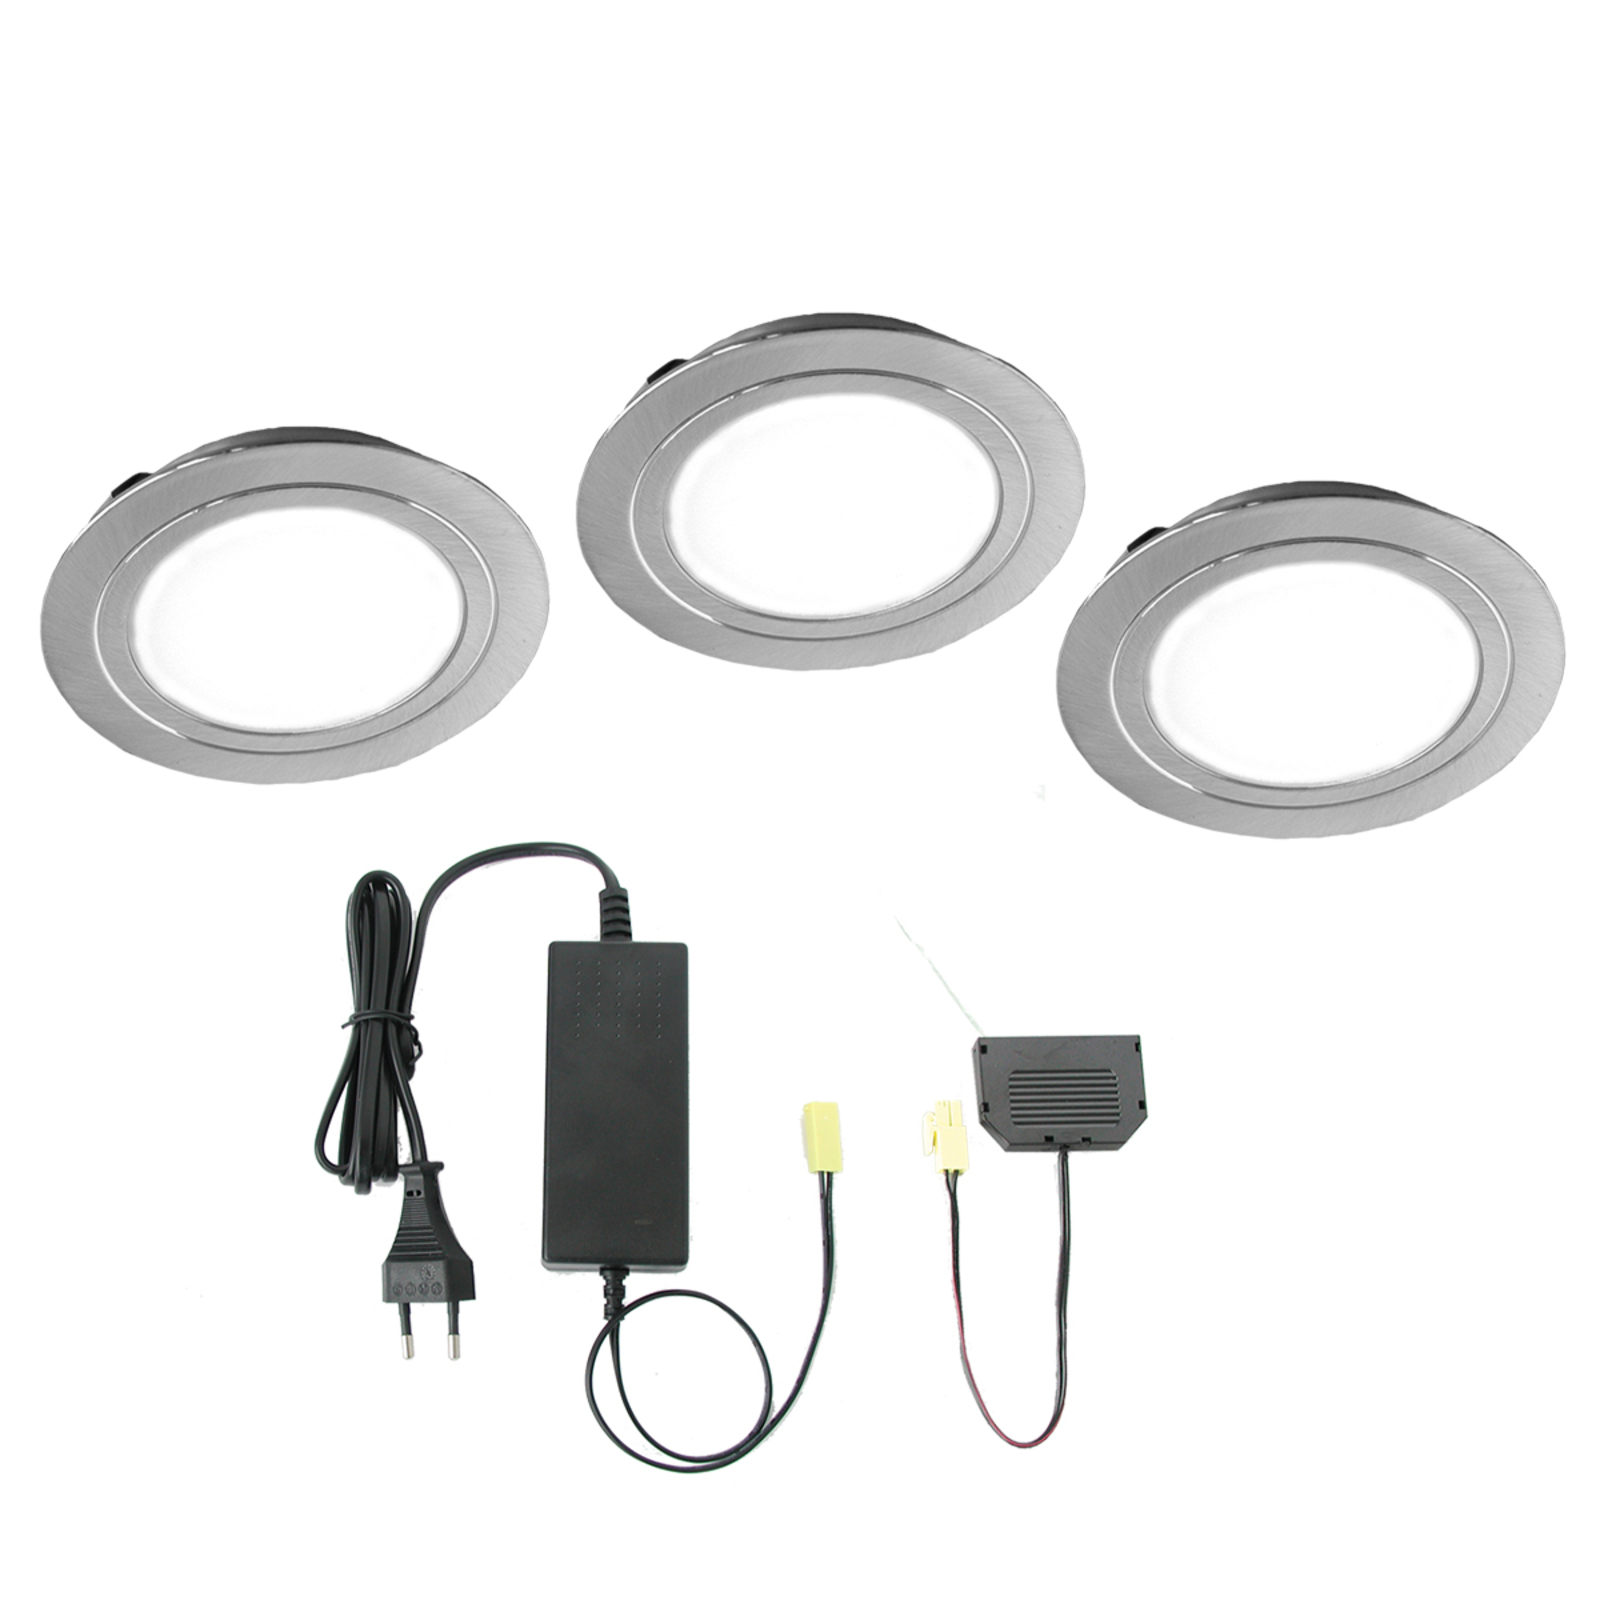 LED spotlight Cubic 55 round in a set of 3 pieces